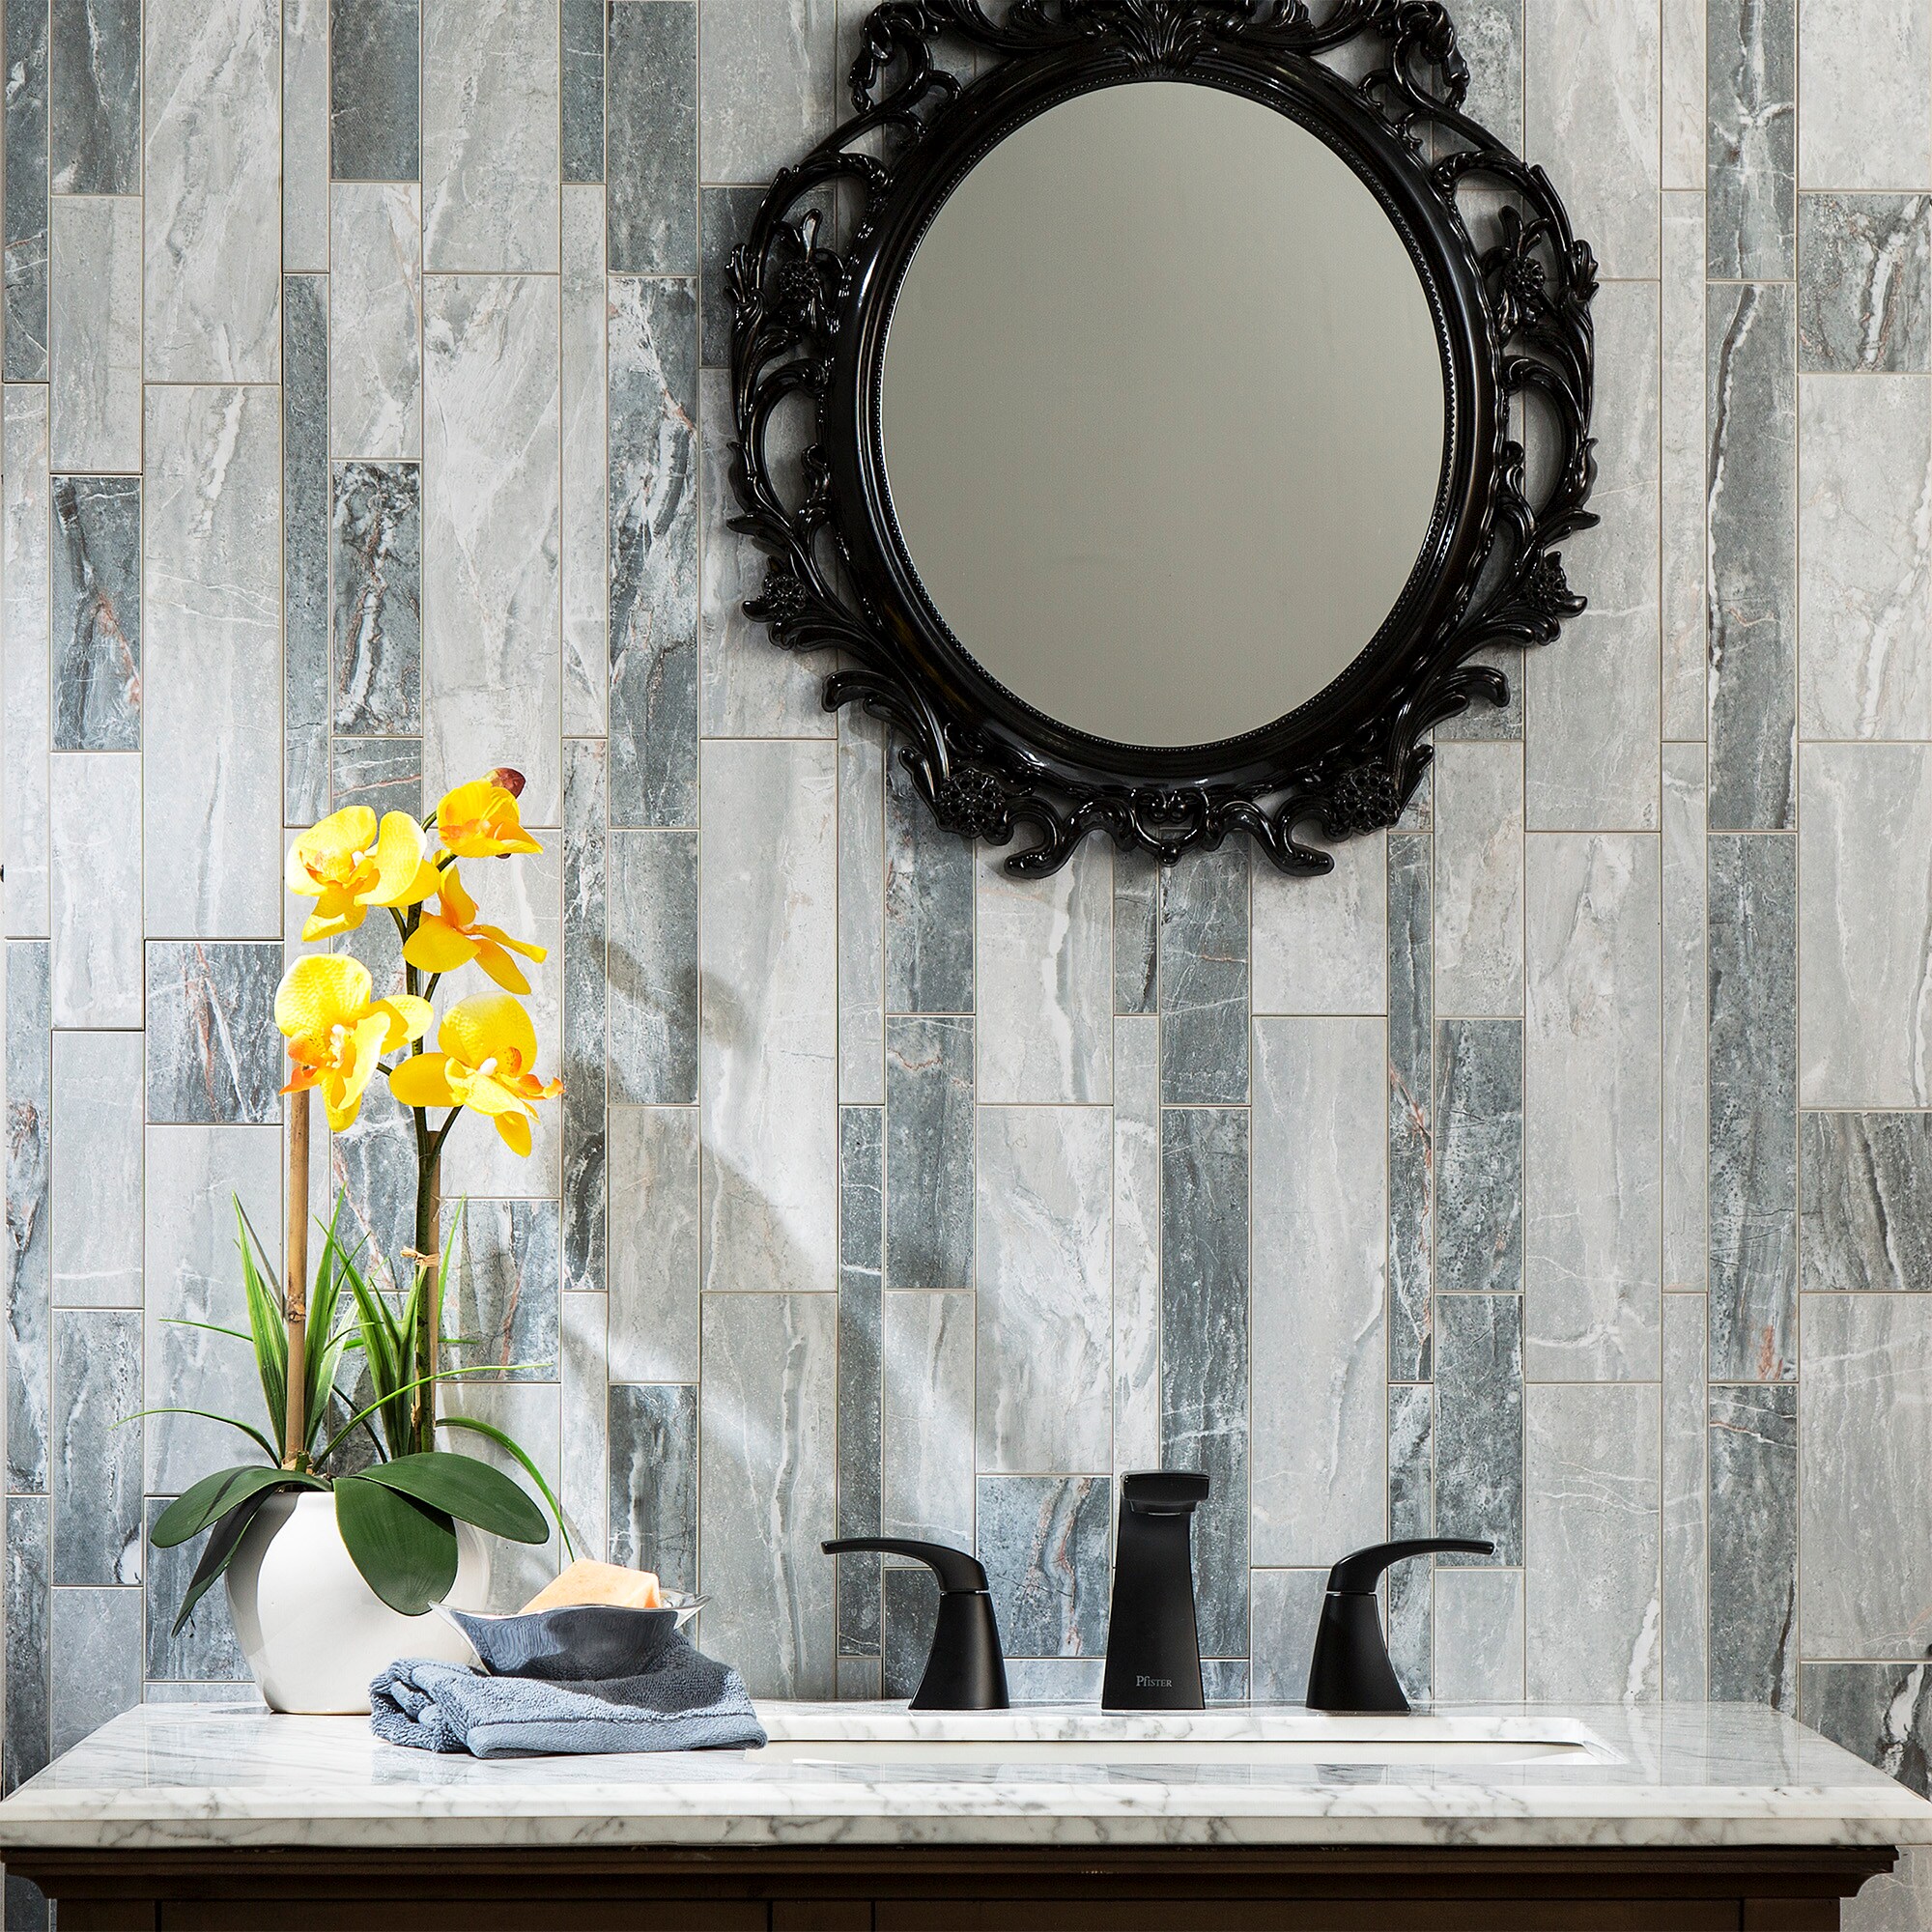 Aspect Peel and Stick Collage Tiles Oyster Tile-1 Sq. ft.